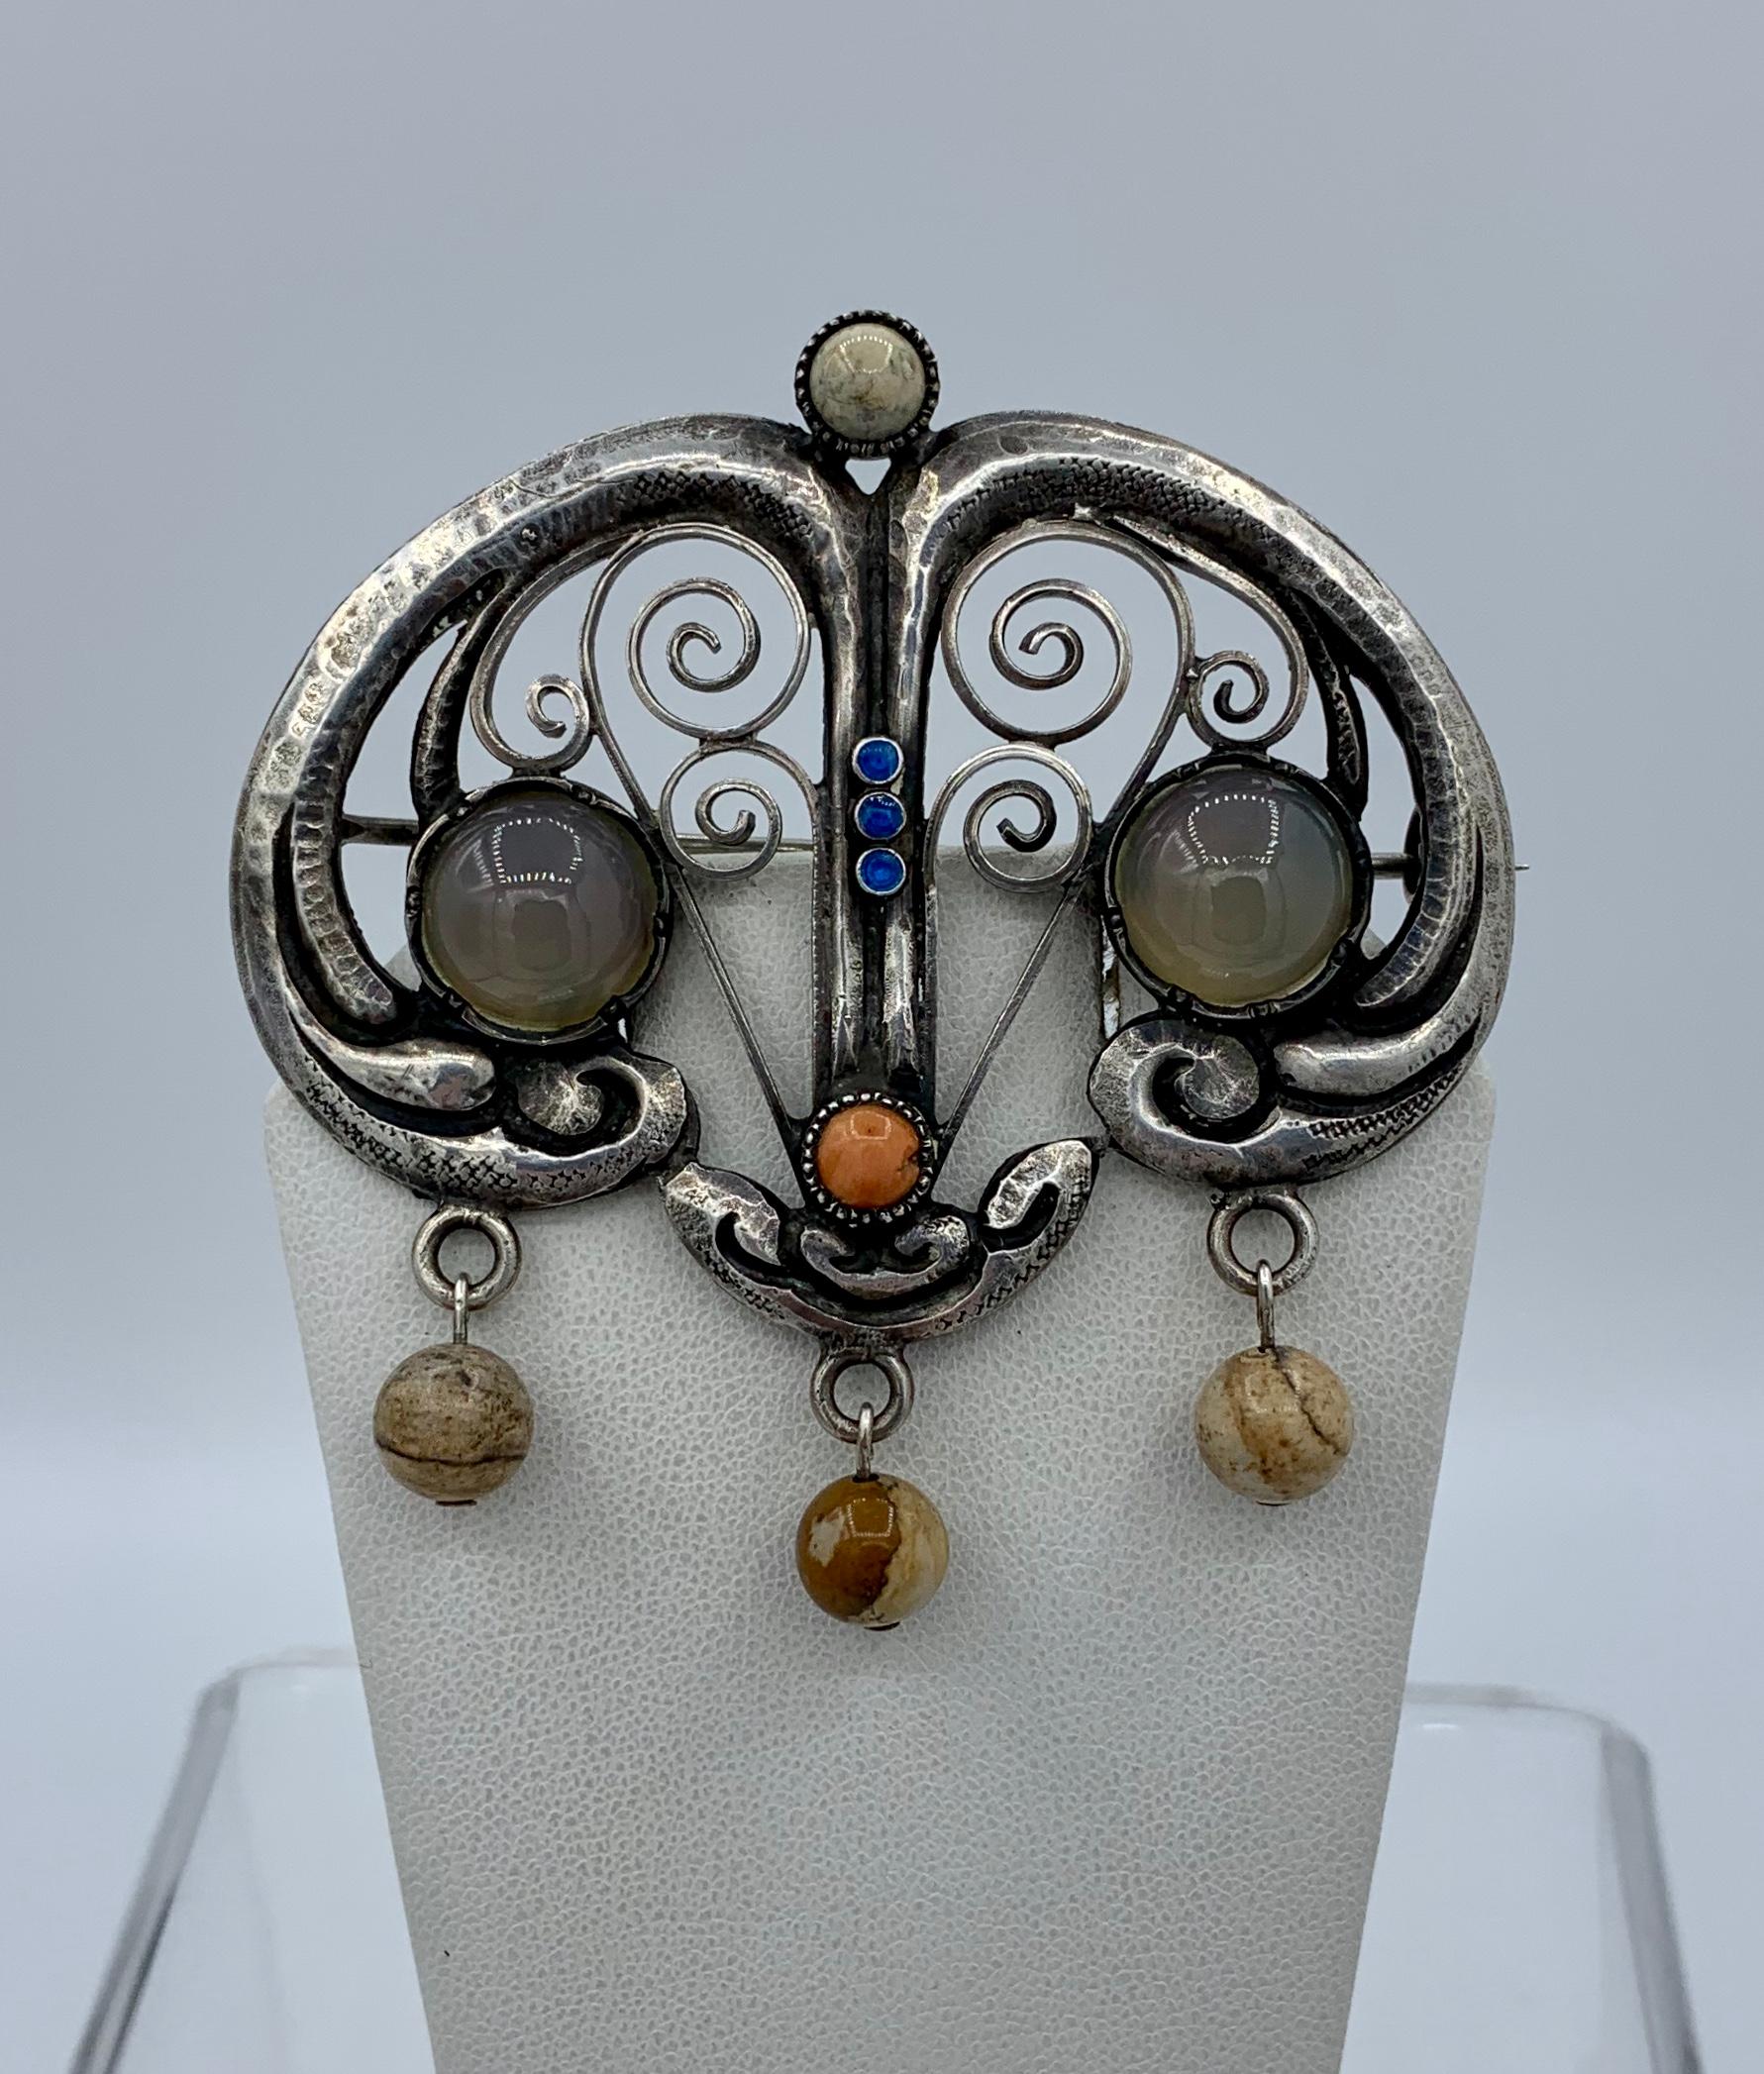 This is a magnificent Museum Quality Arts & Crafts Jugendstil Brooch from the estate of legendary philanthropist and collector Jacqueline Loewe Fowler, whose jewels are in the collection of the Metropolitan Museum of Art.   The brooch is of